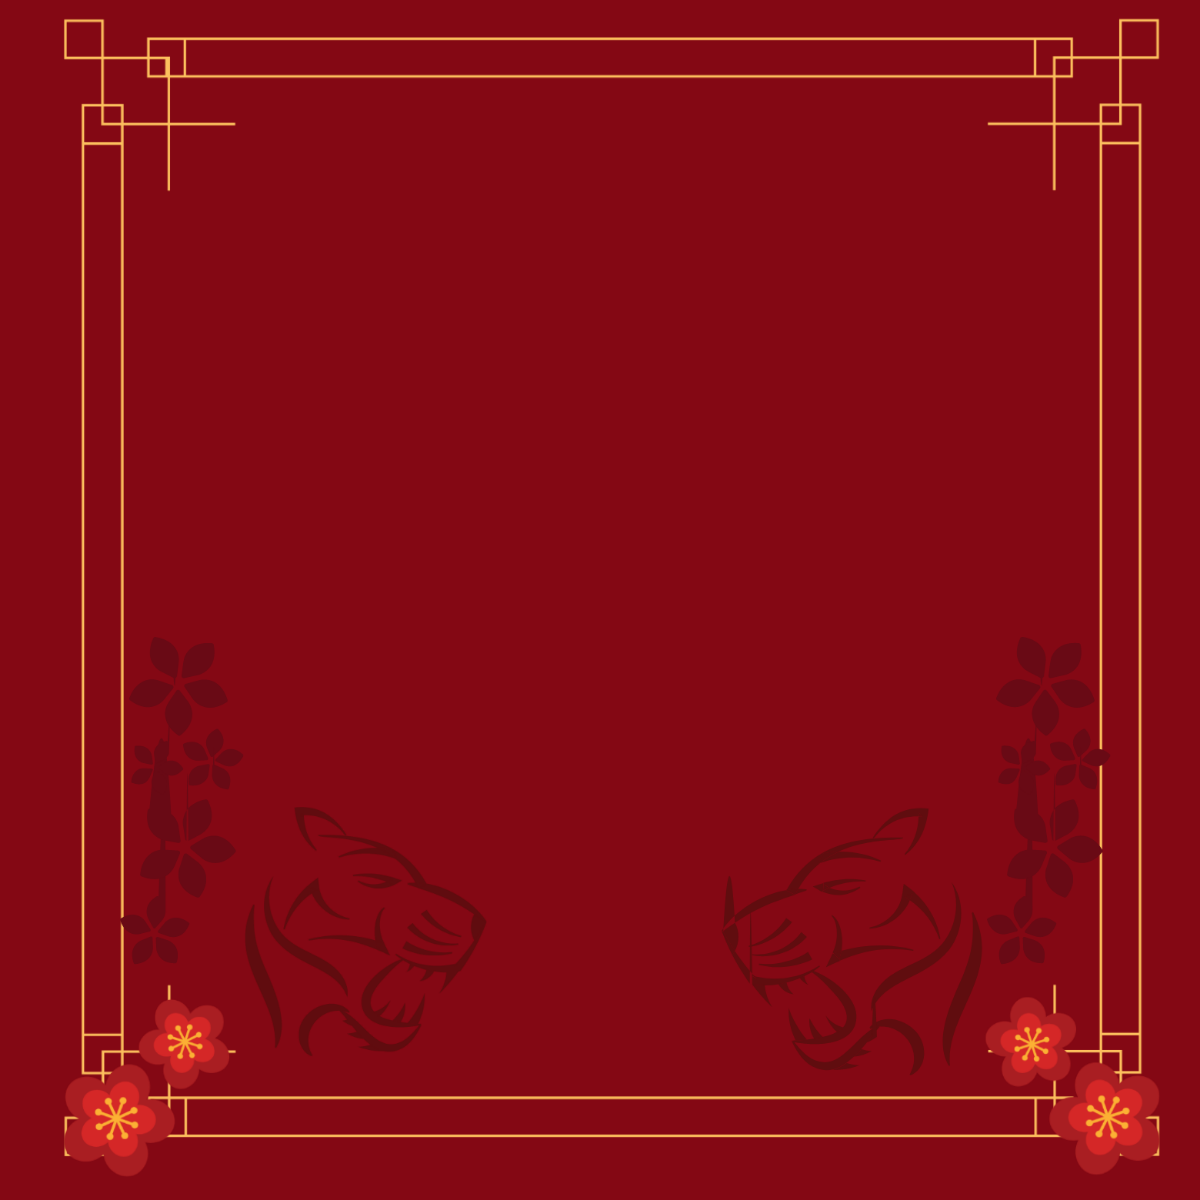 Free Lunar New Year Border Vector Template